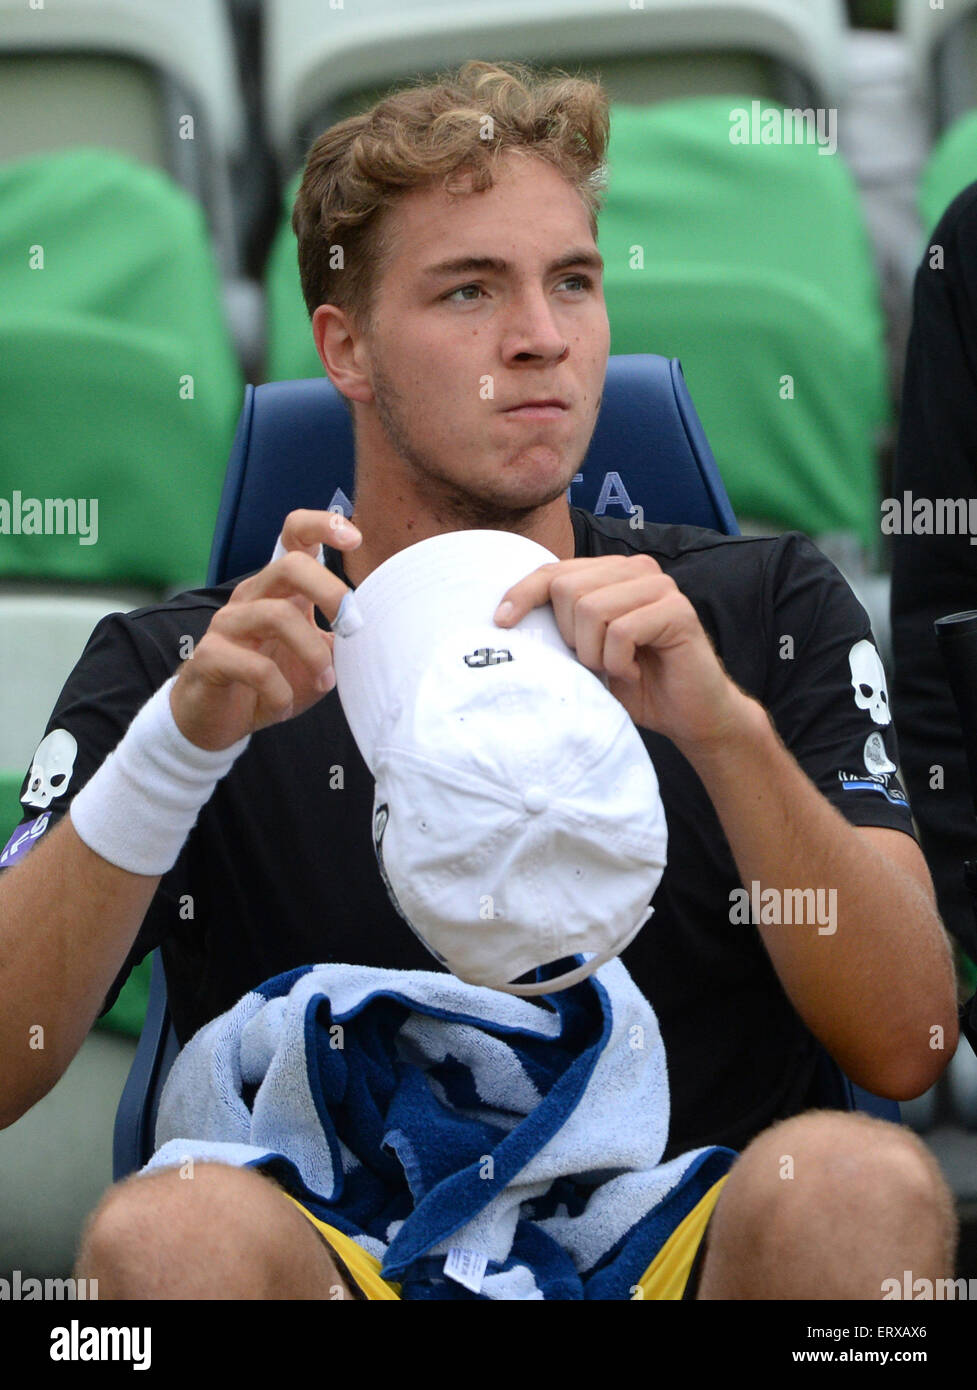 Stuttgart, Germany. 09th June, 2015. Jan Lennard Struff of Germany at the  first round match against Tomic of Australia at the ATP tennis tournament  in Stuttgart, Germany, 09 June 2015. Photo: MARIJAN